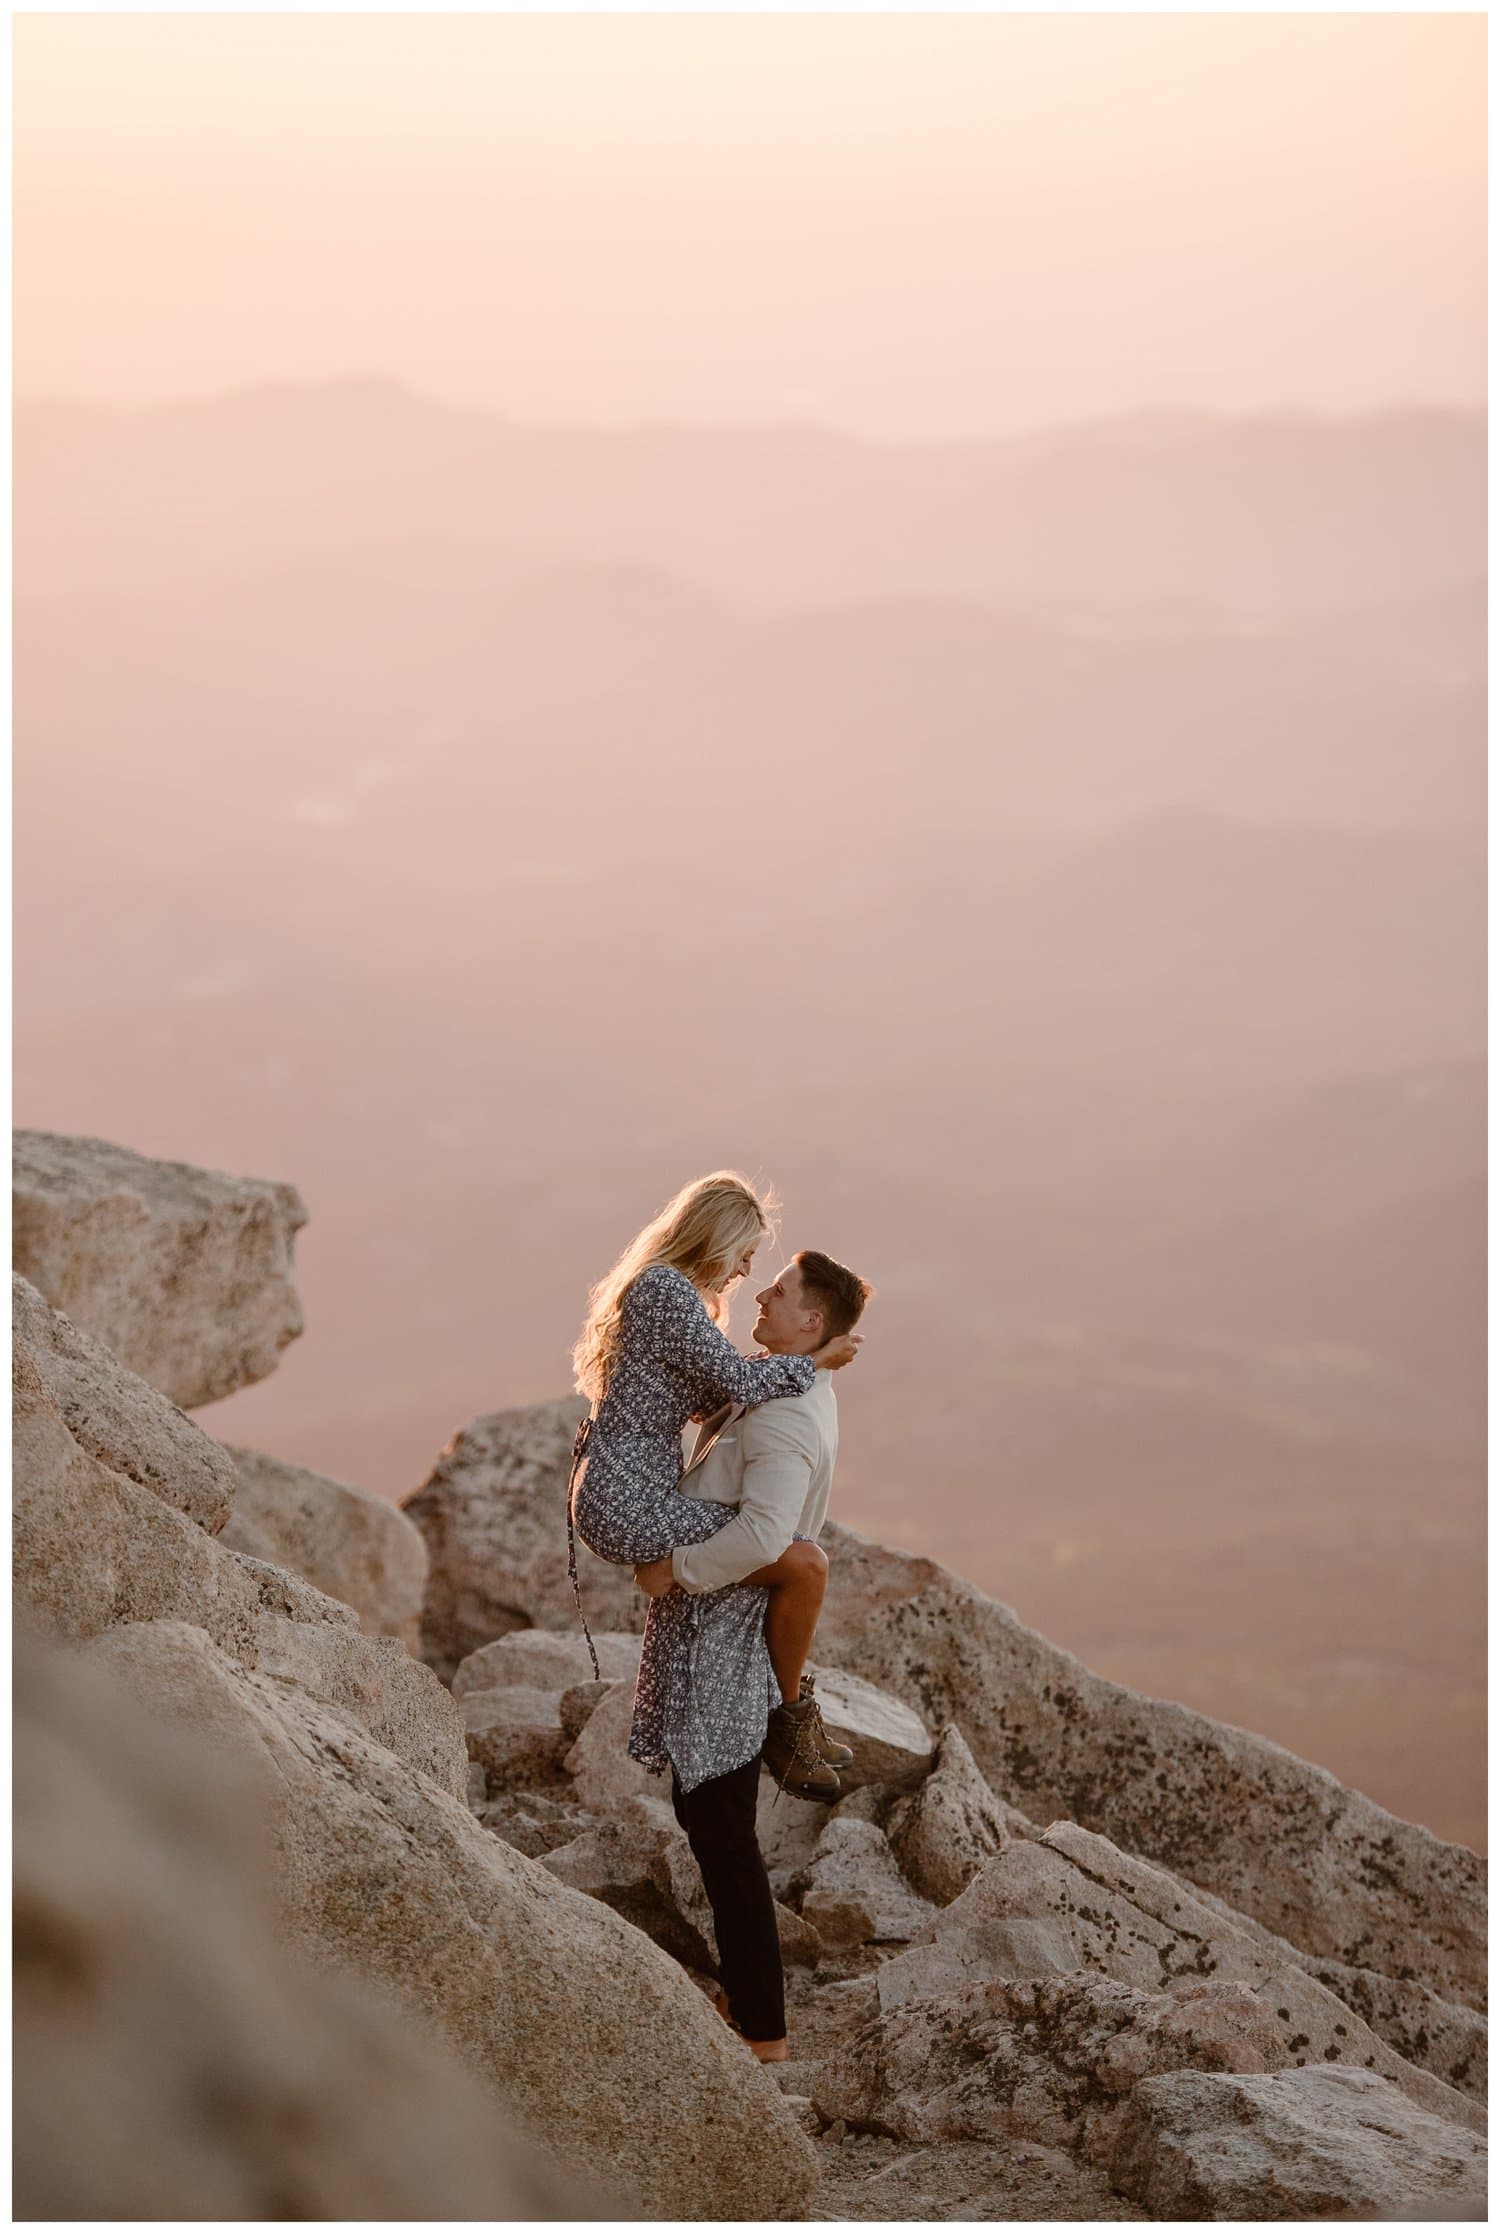 Man holds woman and they are smiling at each other, at the top of Mt. Evans in Colorado.